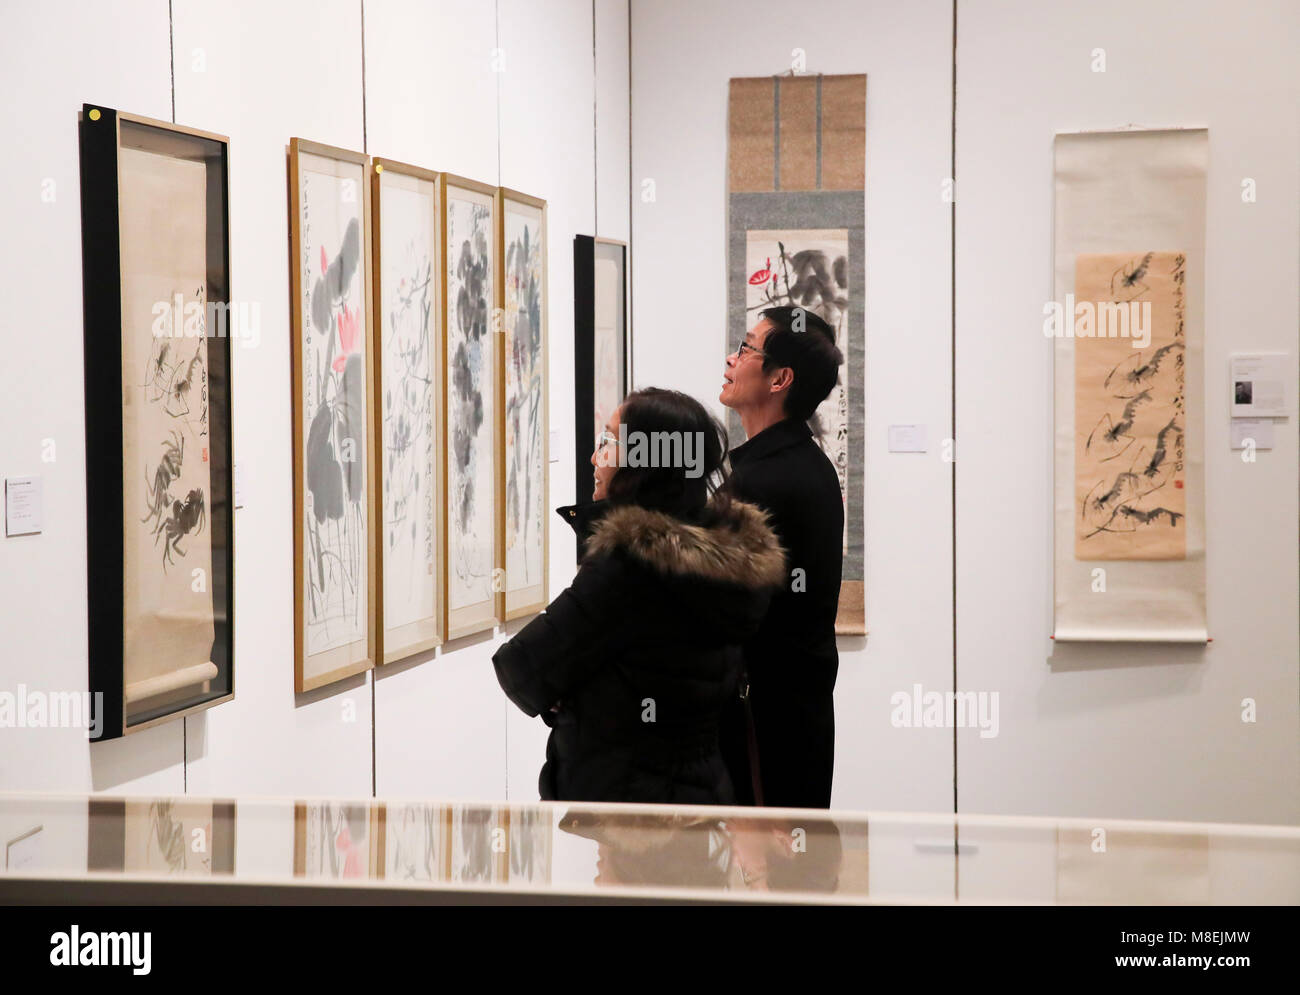 New York, USA. 16th Mar, 2018. Visitors look at artworks of Chinese artist Qi Baishi during the public viewing of Christie's Asian Art Week in New York, the United States, on March 16, 2018. Christie's on Friday kicked off its Asian Art Week, a series of auctions, viewings, and events, from March 16 to March 23. This season presents six distinct auctions including Fine Chinese Ceramics and Works of Art, South Asian Modern   Contemporary Art, etc. Credit: Wang Ying/Xinhua/Alamy Live News Stock Photo